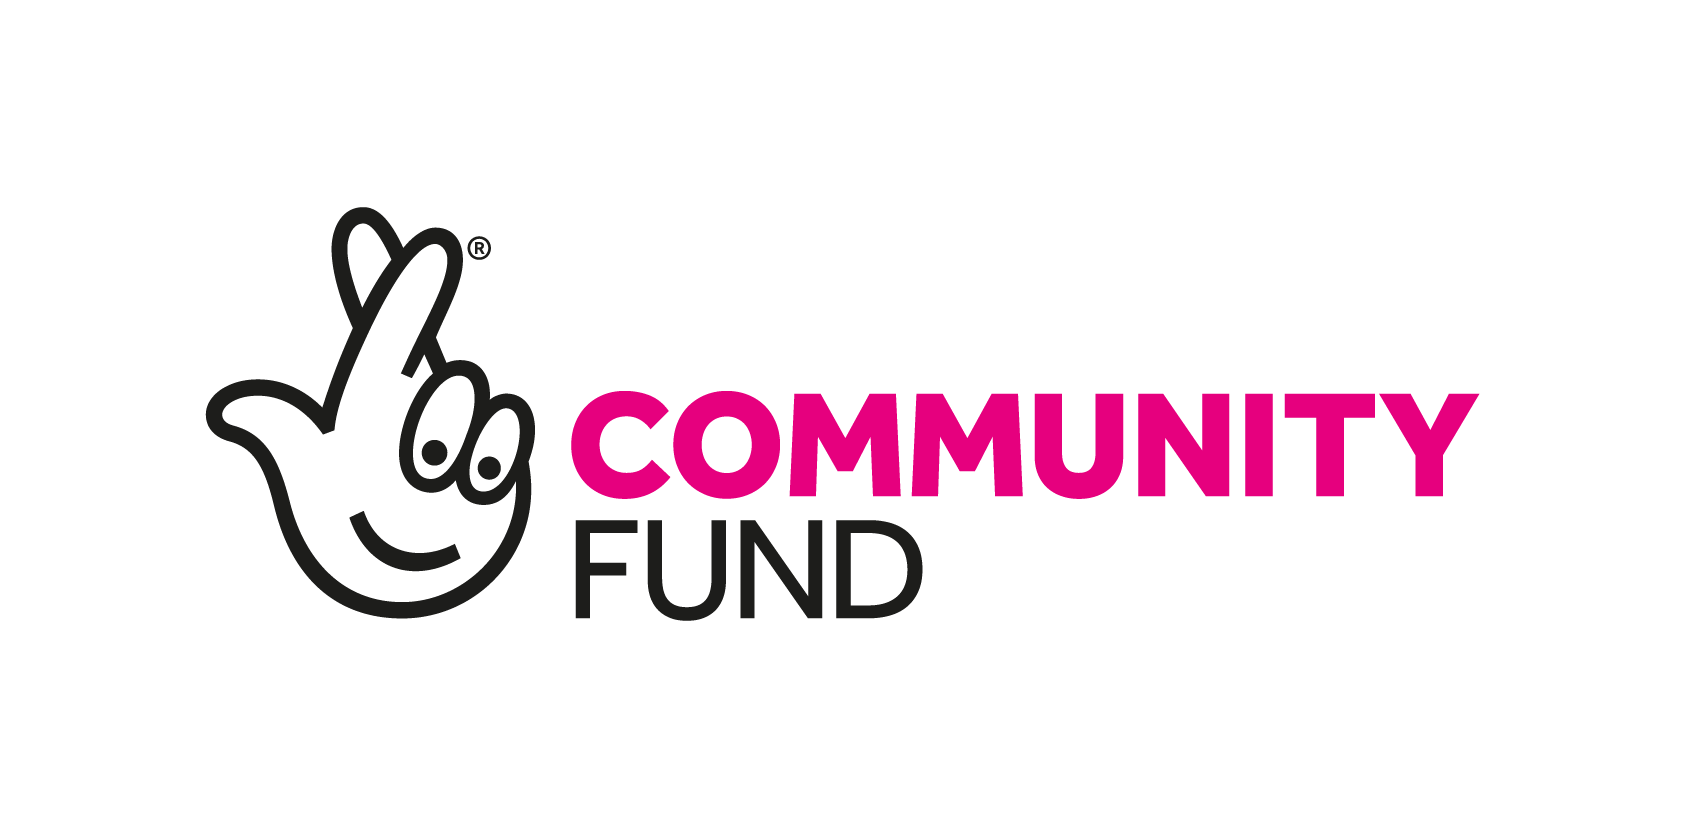 National lottery community fund.png